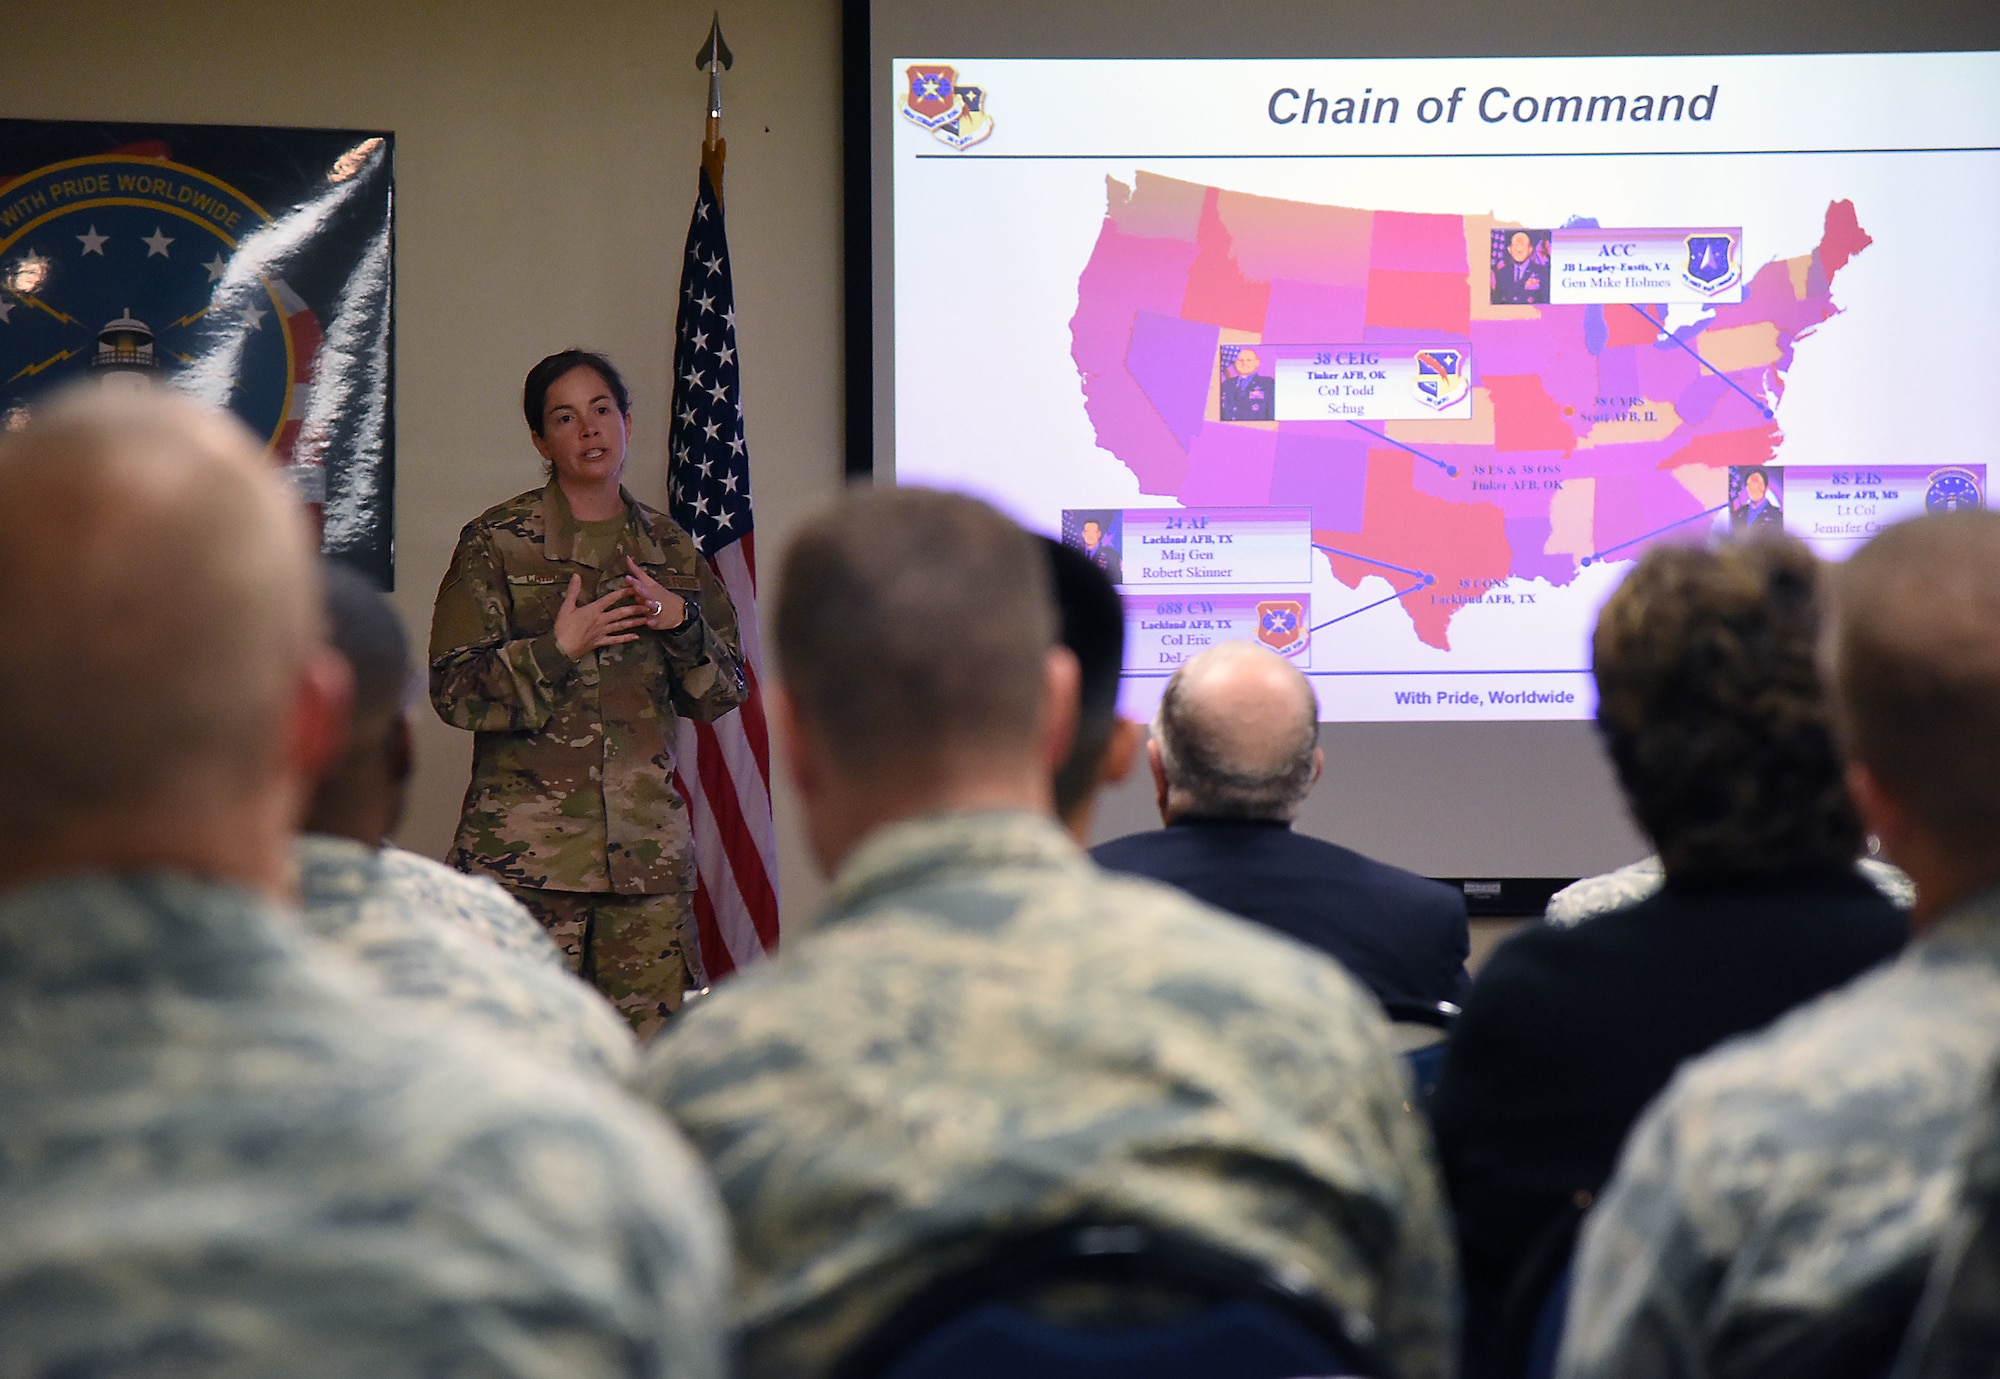 U.S. Air Force Lt. Col. Jennifer Carns, 85th Engineering Installation Squadron commander, delivers a mission briefing during an open house inside Maltby Hall at Keesler Air Force Base, Mississippi, Oct. 11, 2018. Tower rescue and fiber splicing demonstrations were conducted as well as tours inside the tool cage, telecommunications lab and the electromagnetics lab. (U.S. Air Force photo by Kemberly Groue)